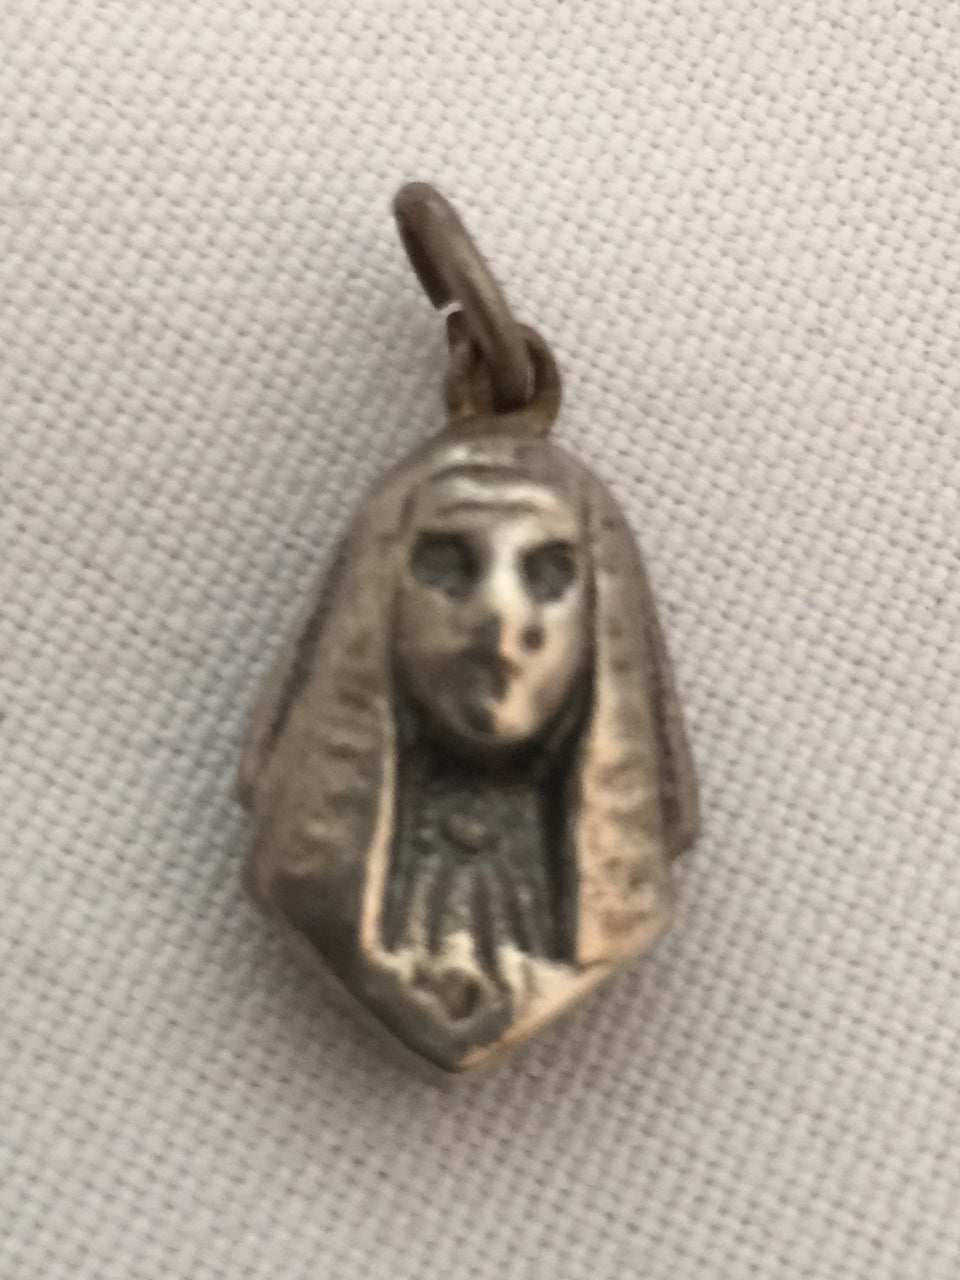 Vintage Sterling Silver Charm of an Egyptian Pharaoh  King Tut?